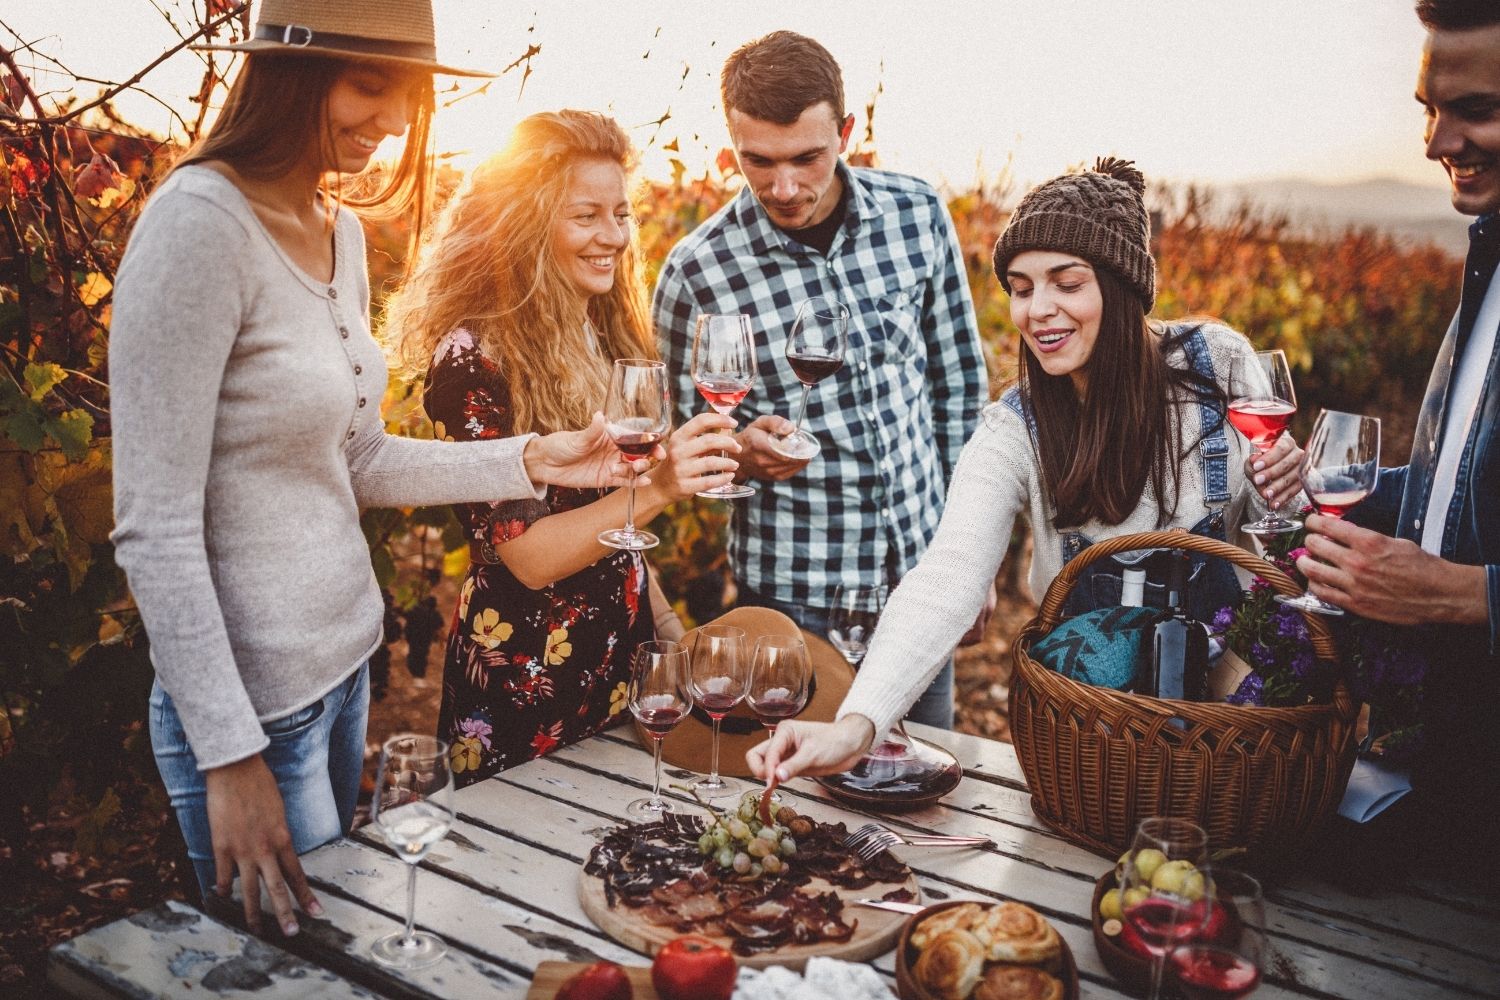 Five-people-laughing-toasting-enjoying-wine-culinary-delights